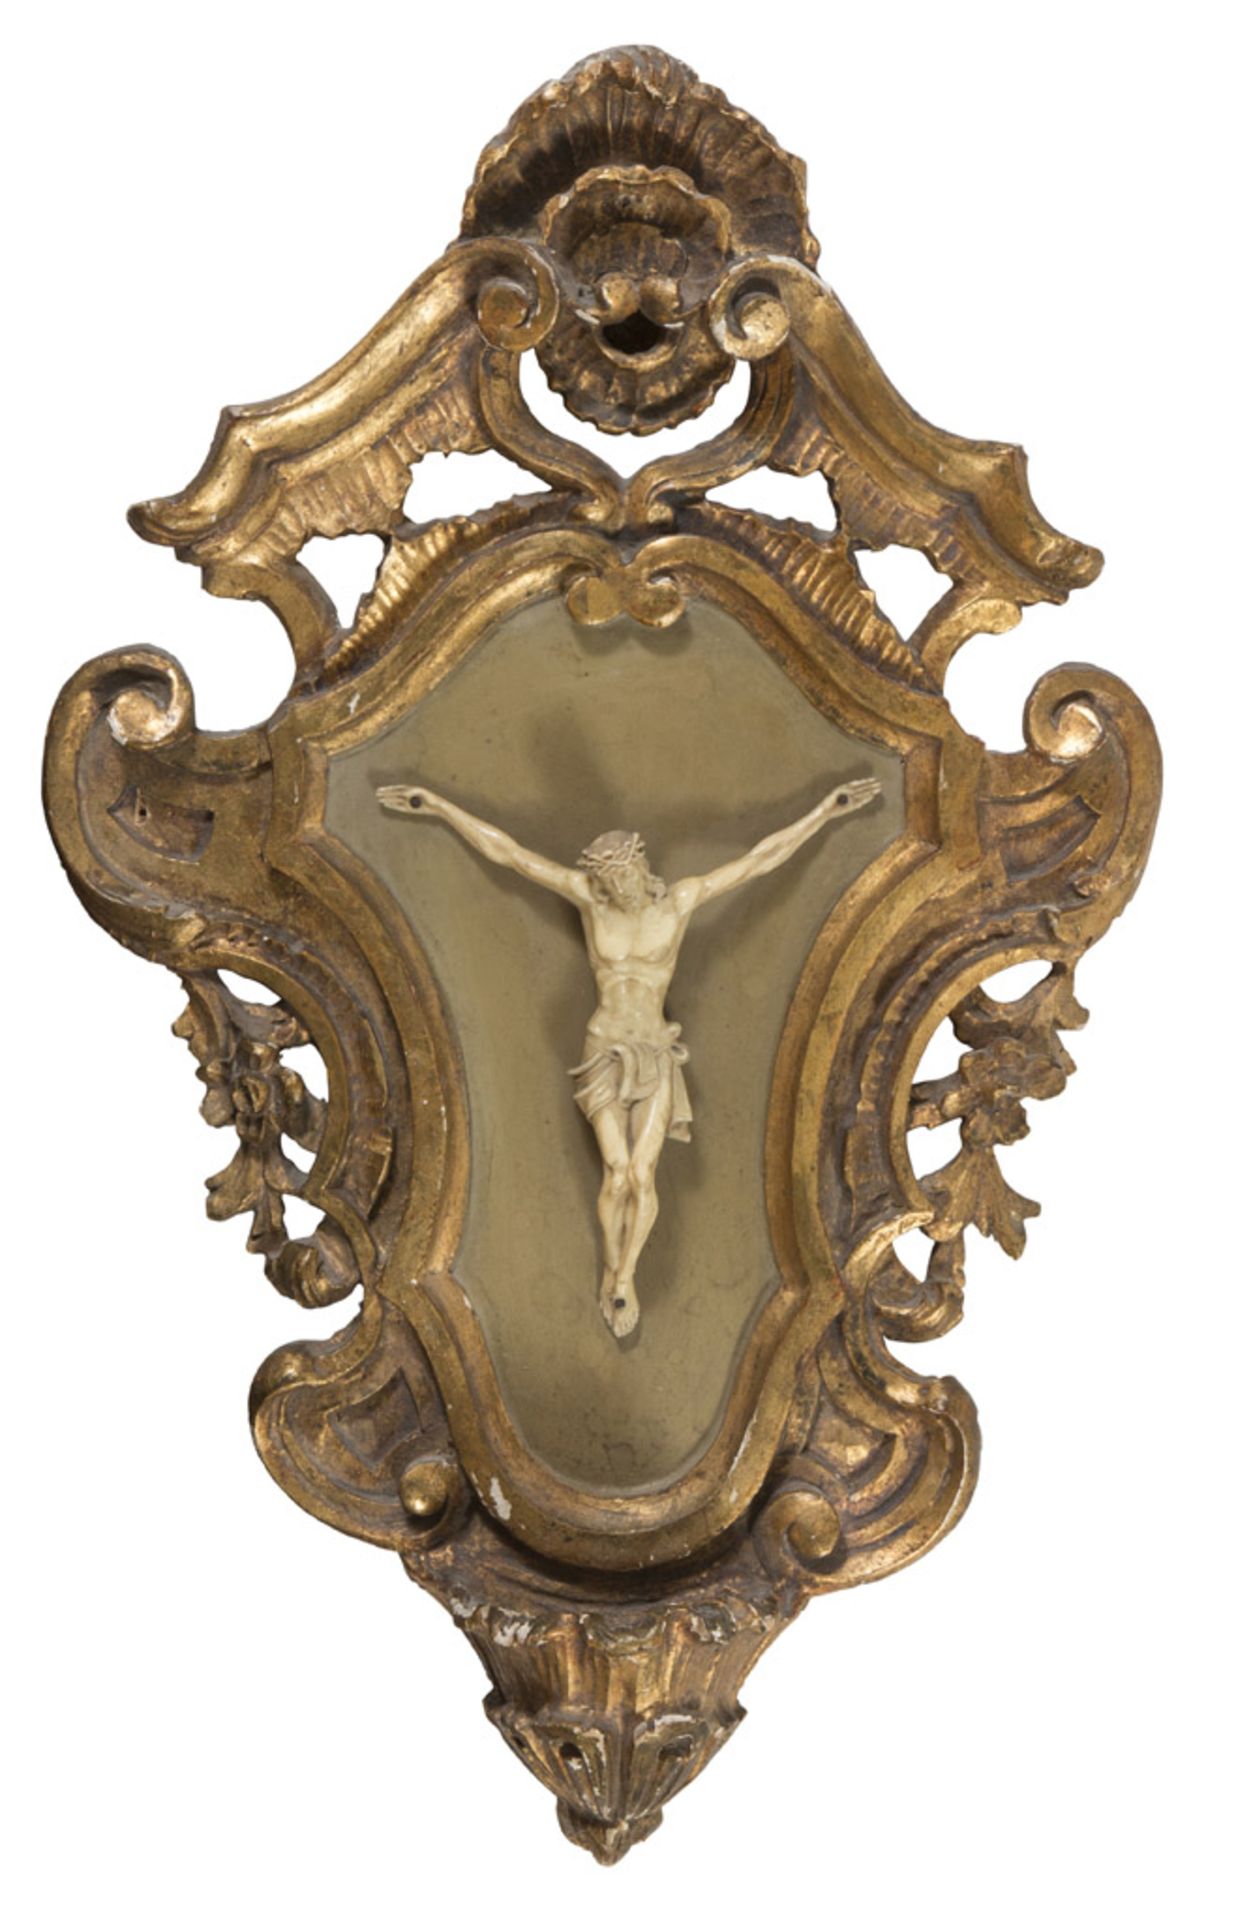 SMALL CHRIST IN IVORY, END 18TH CENTURY applied on cartouche frame in carved giltwood. Total